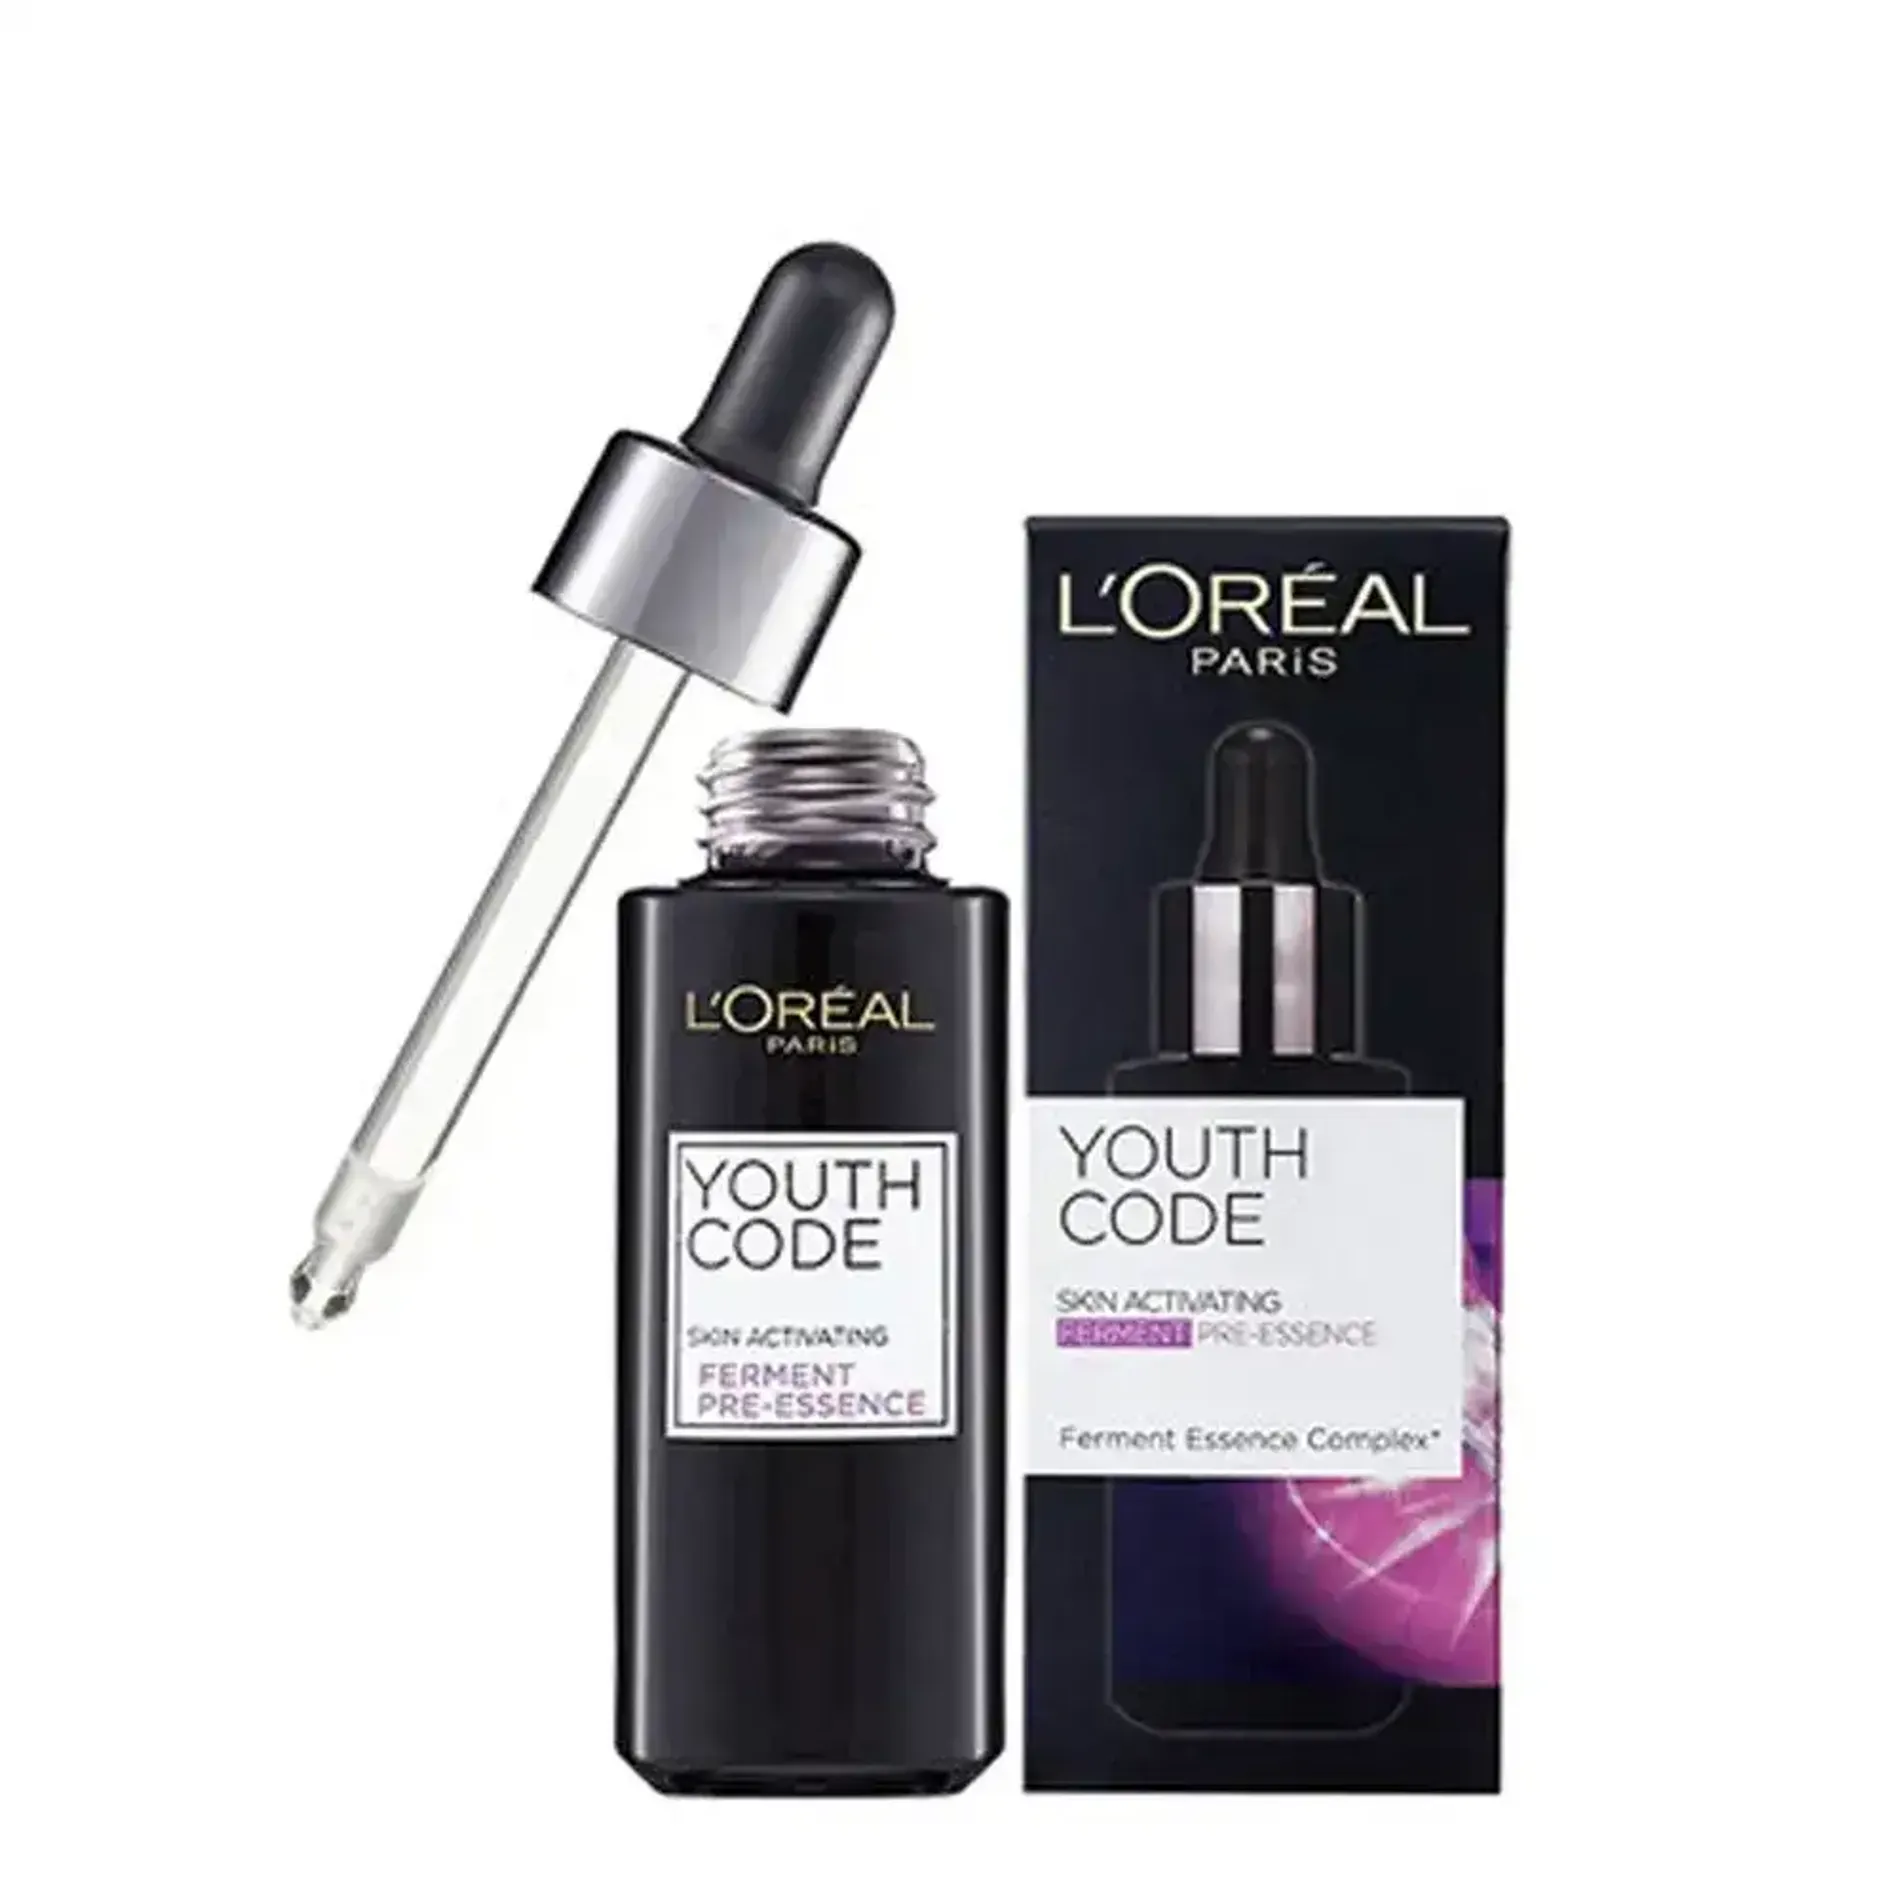 tinh-chat-tre-hoa-da-l-oreal-youth-code-skin-activating-ferment-pre-essence-30ml-1